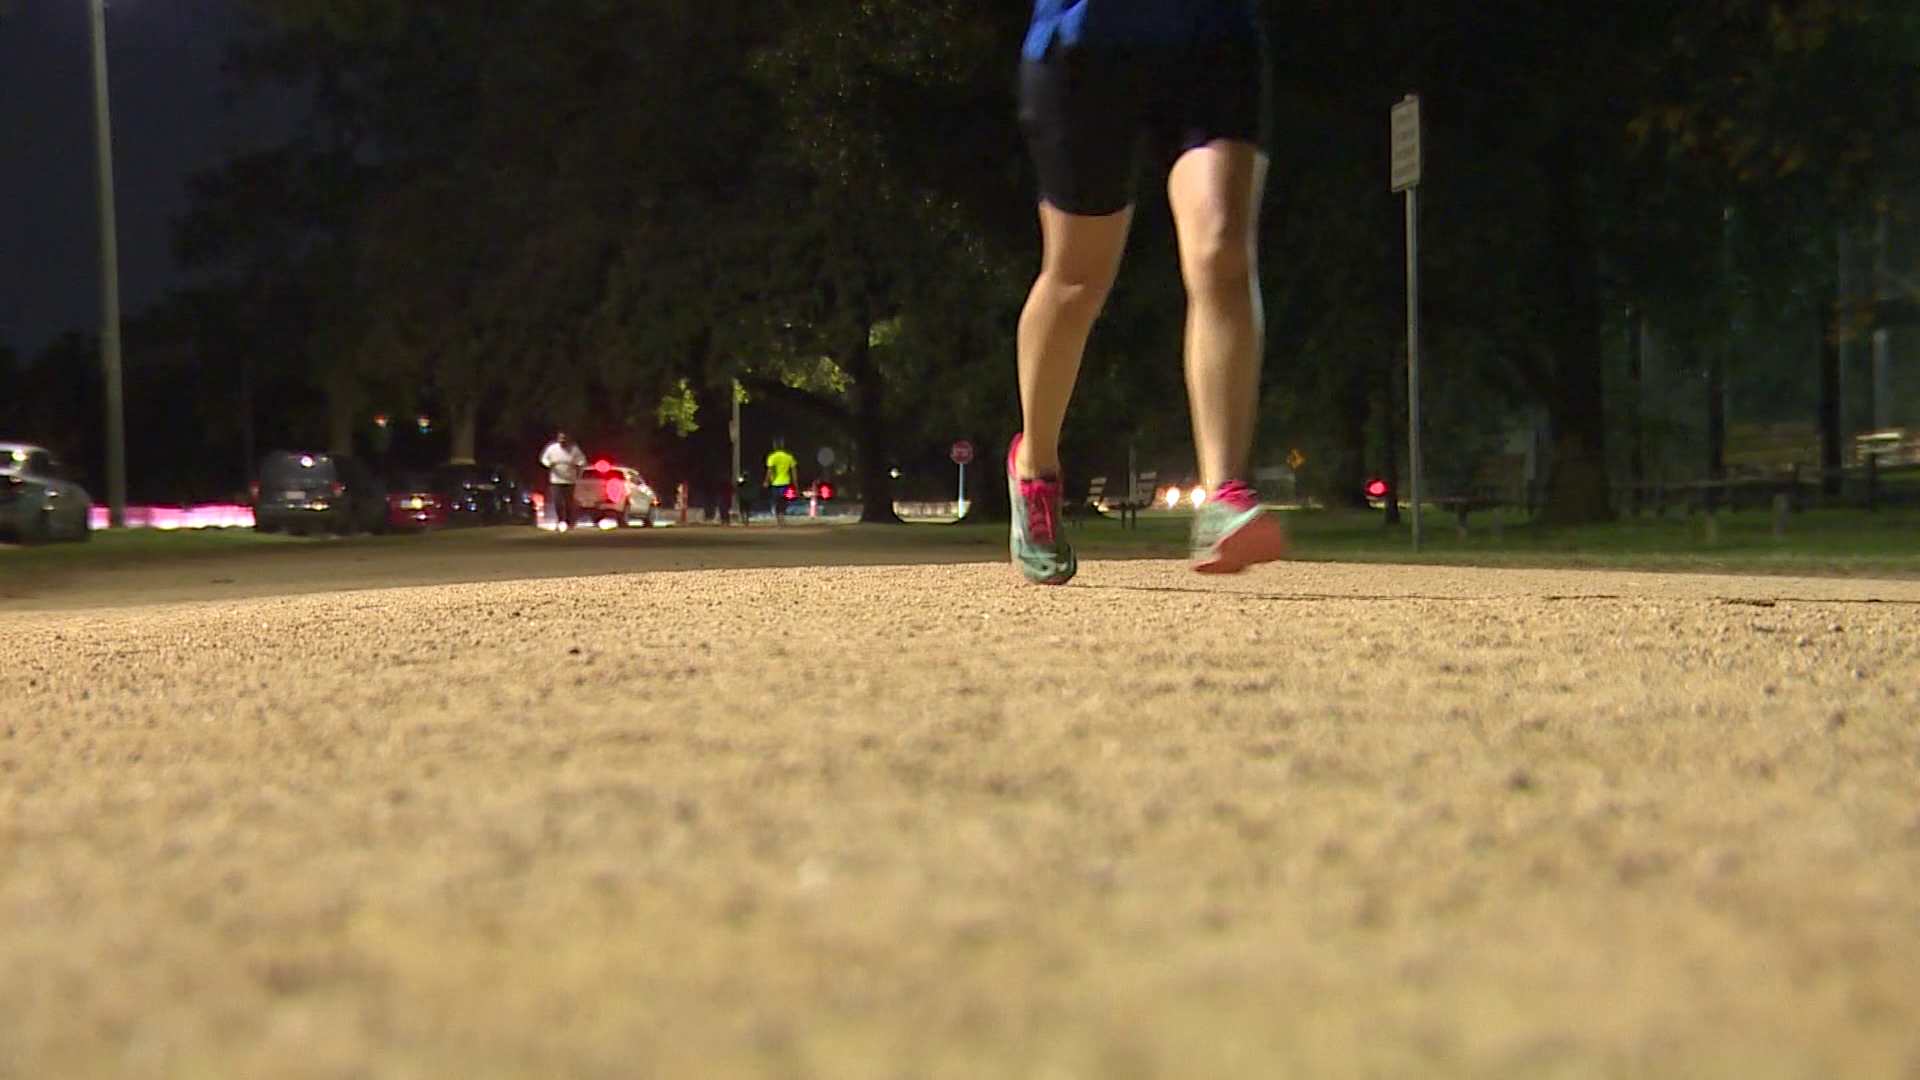 Houston Police urged joggers to be cautious after a man assaulted a woman in Memorial Park on Christmas Eve.